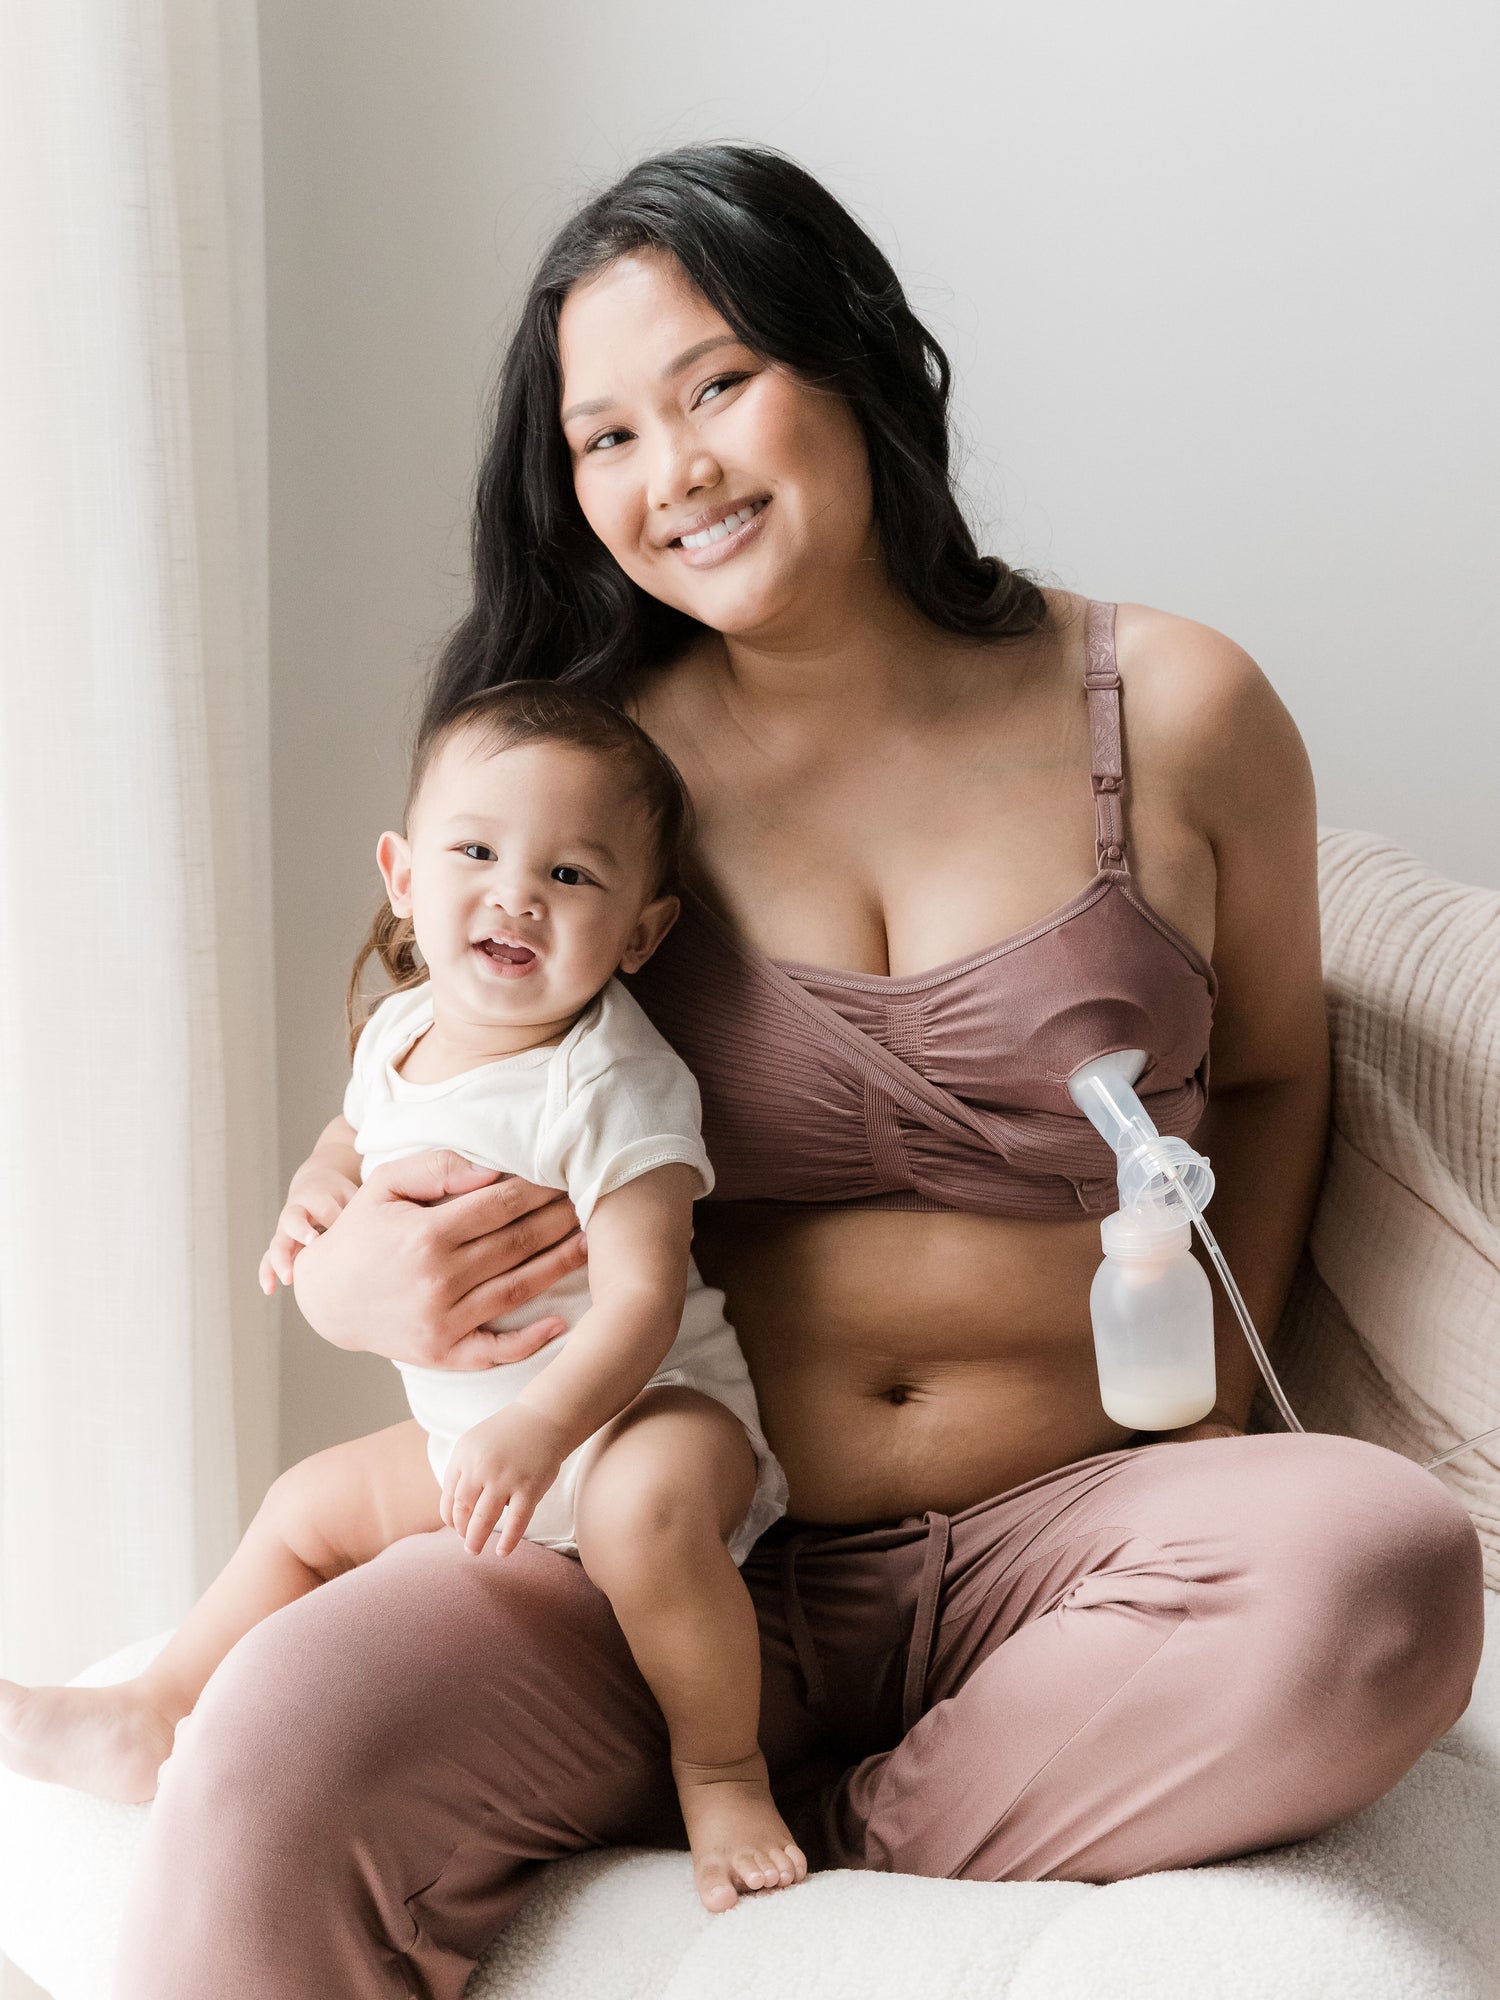 Full Beauty Bras Are Pure Comfort + {Giveaway} - Savvy Sassy Moms